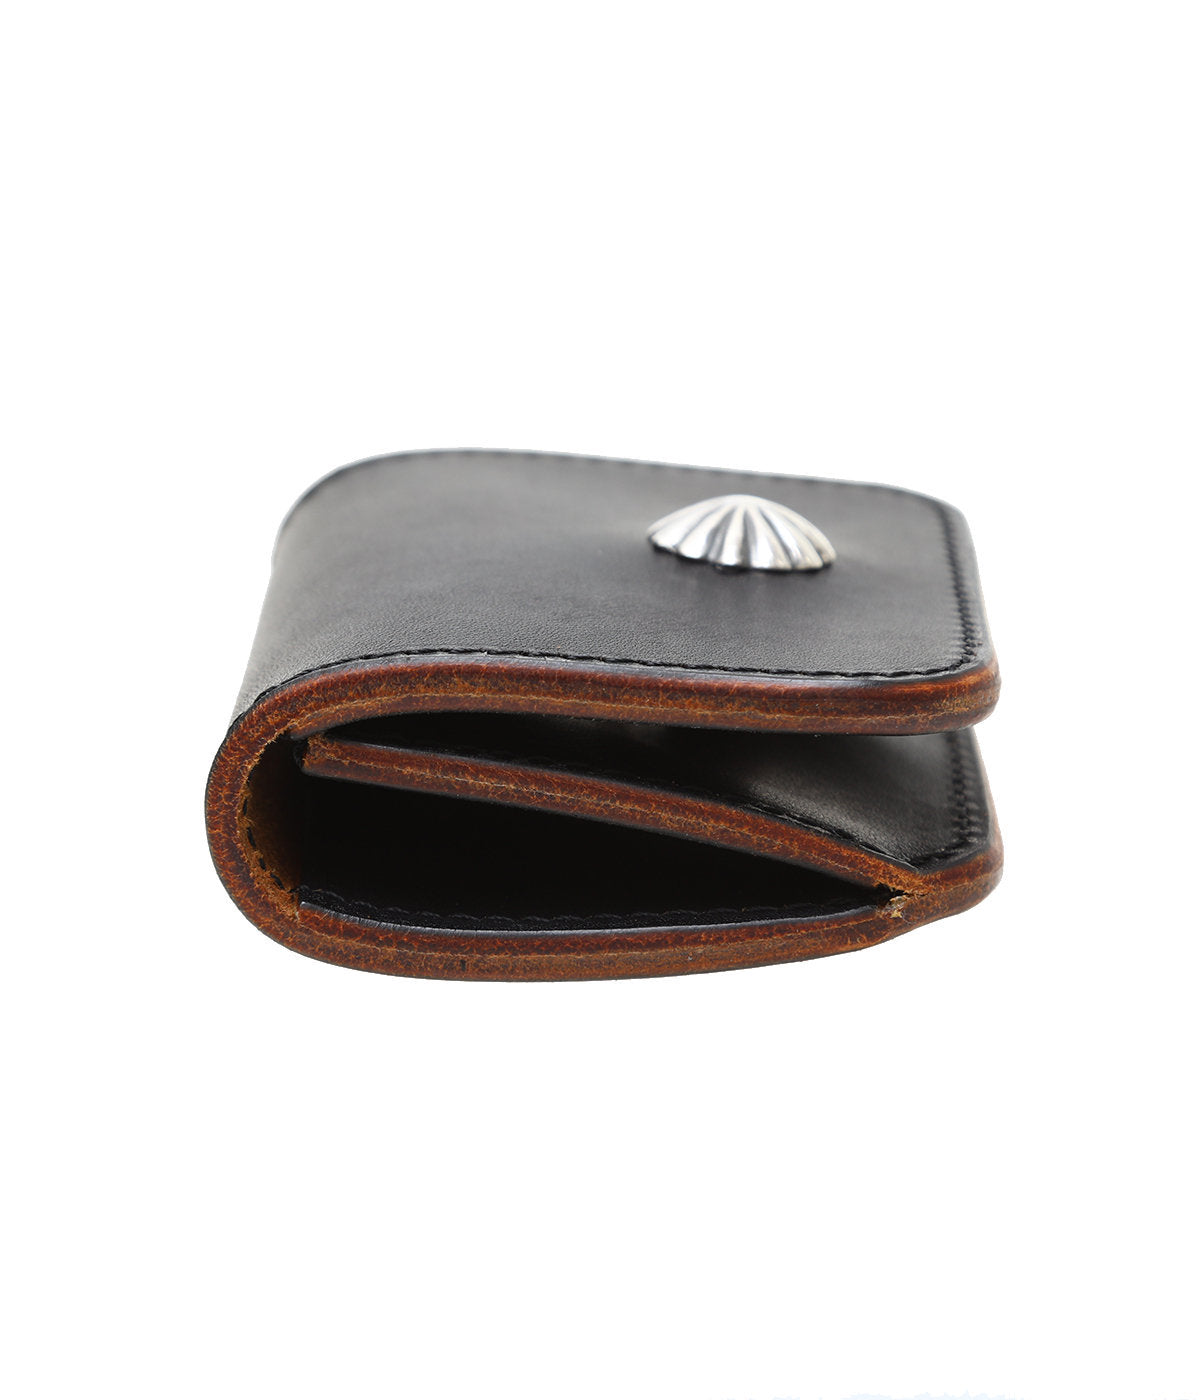 【NEW限定品】larry smith COIN CASE 小物